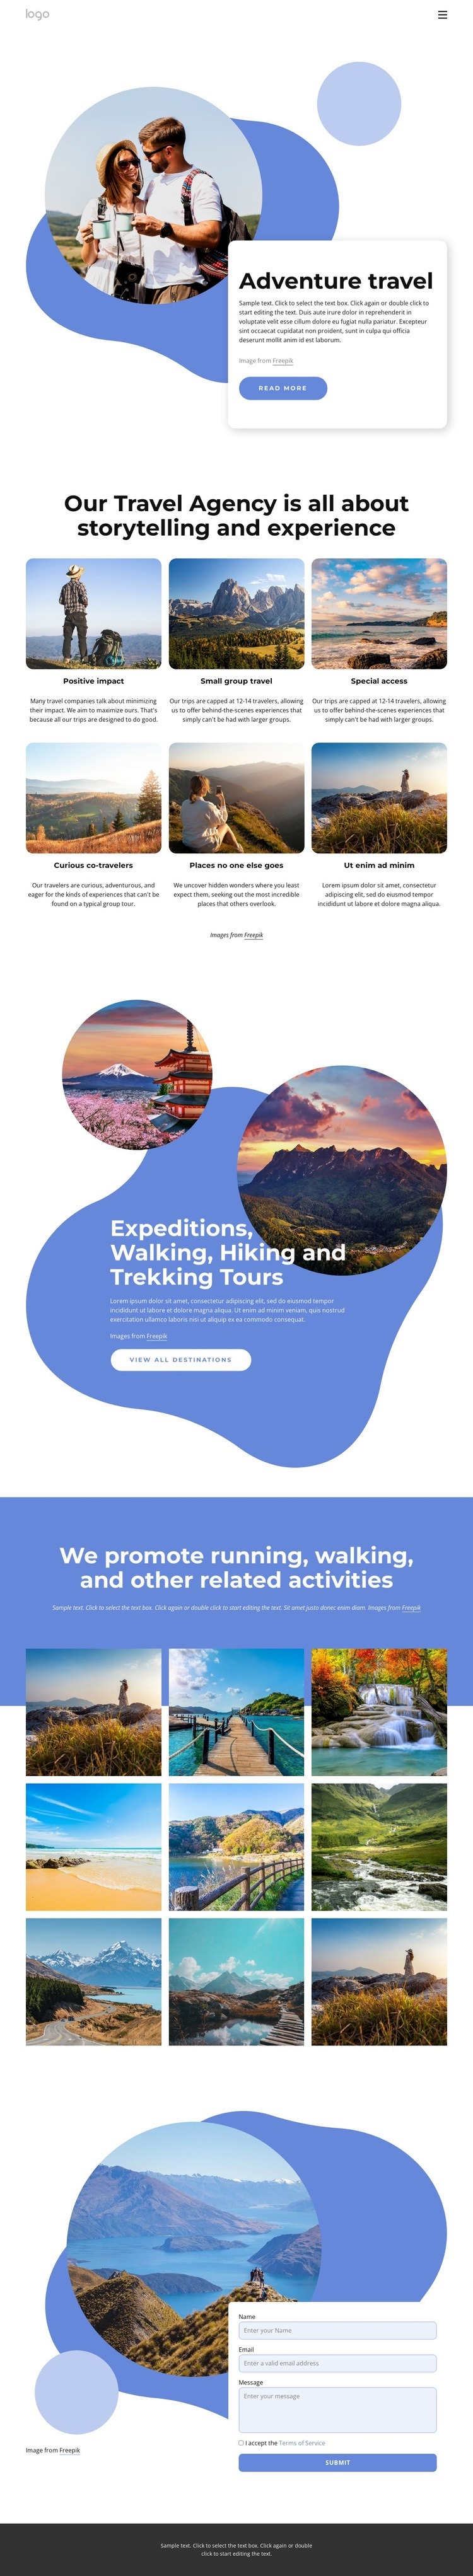 Agency specializing in luxury adventure travel Wix Template Alternative